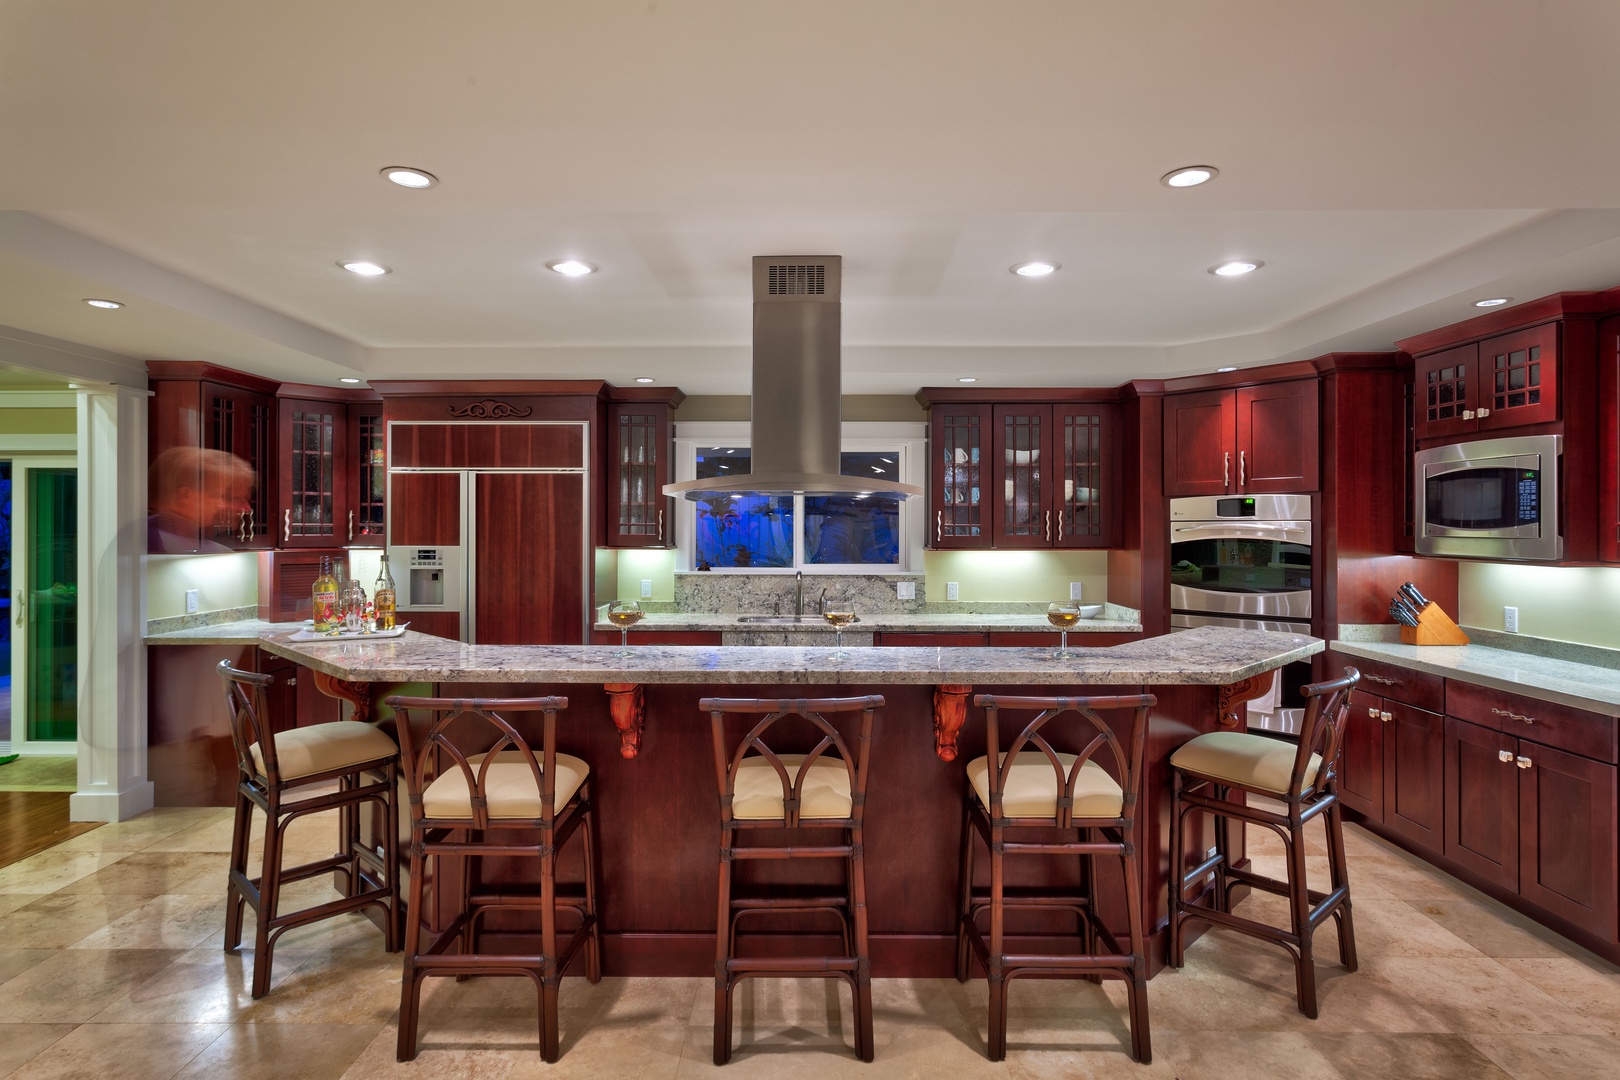 Kailua Vacation Rentals, Maluhia - Cook up a delicious meal, all while entertaining in this open floor plan kitchen.